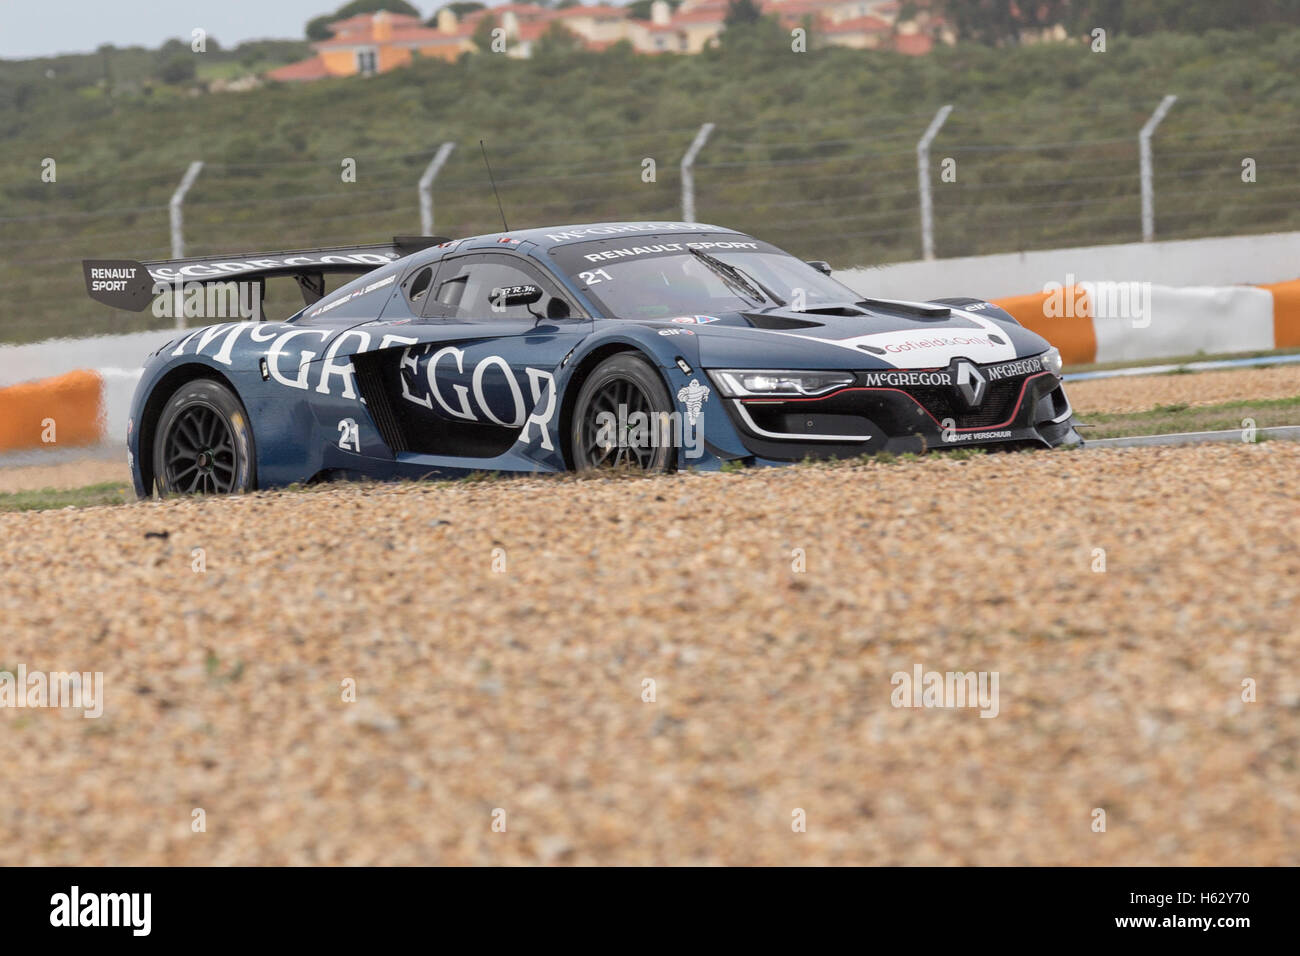 October 23, 2016. Estoril, Portugal. The #21 Equipe Verschuur (NED, driven by Pieter Schothorst (NED) and Jeroen Schothorst (NED) during the Race of Renault Sport Trophy, during the European Le Mans Series Week-End Estoril Credit:  Alexandre de Sousa/Alamy Live News Stock Photo